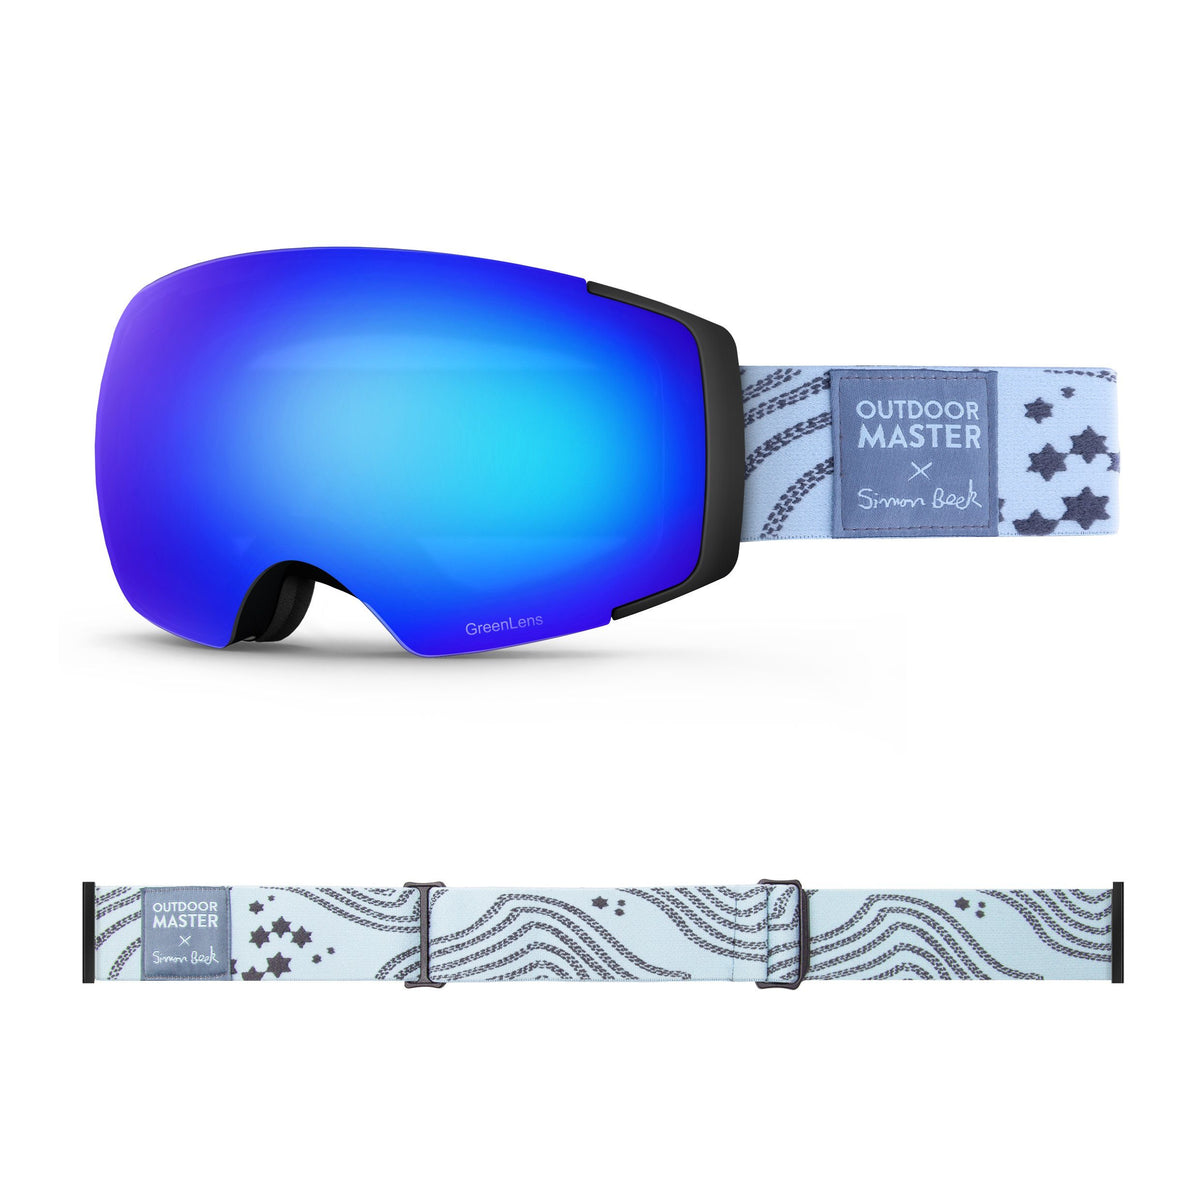 OutdoorMaster x Simon Beck Ski Goggles Pro Series - Snowshoeing Art Limited Edition OutdoorMaster GreenLens VLT 15% TAC Grey with REVO Blue Polarized Star Road-Lightsteelblue